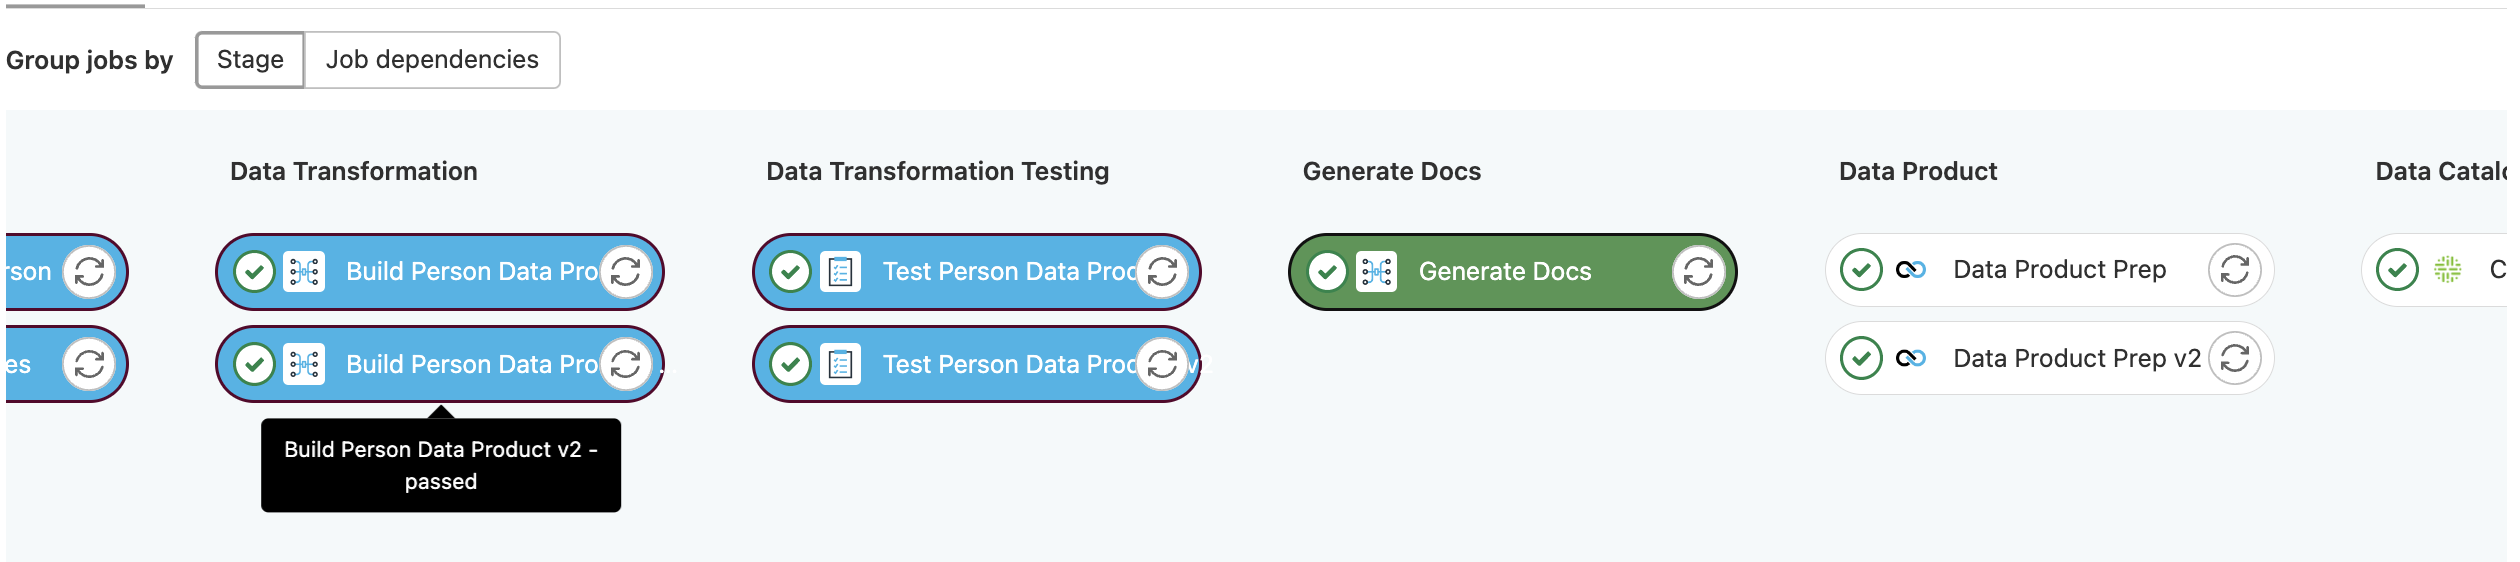 multi versioning of data products !!shadow!!